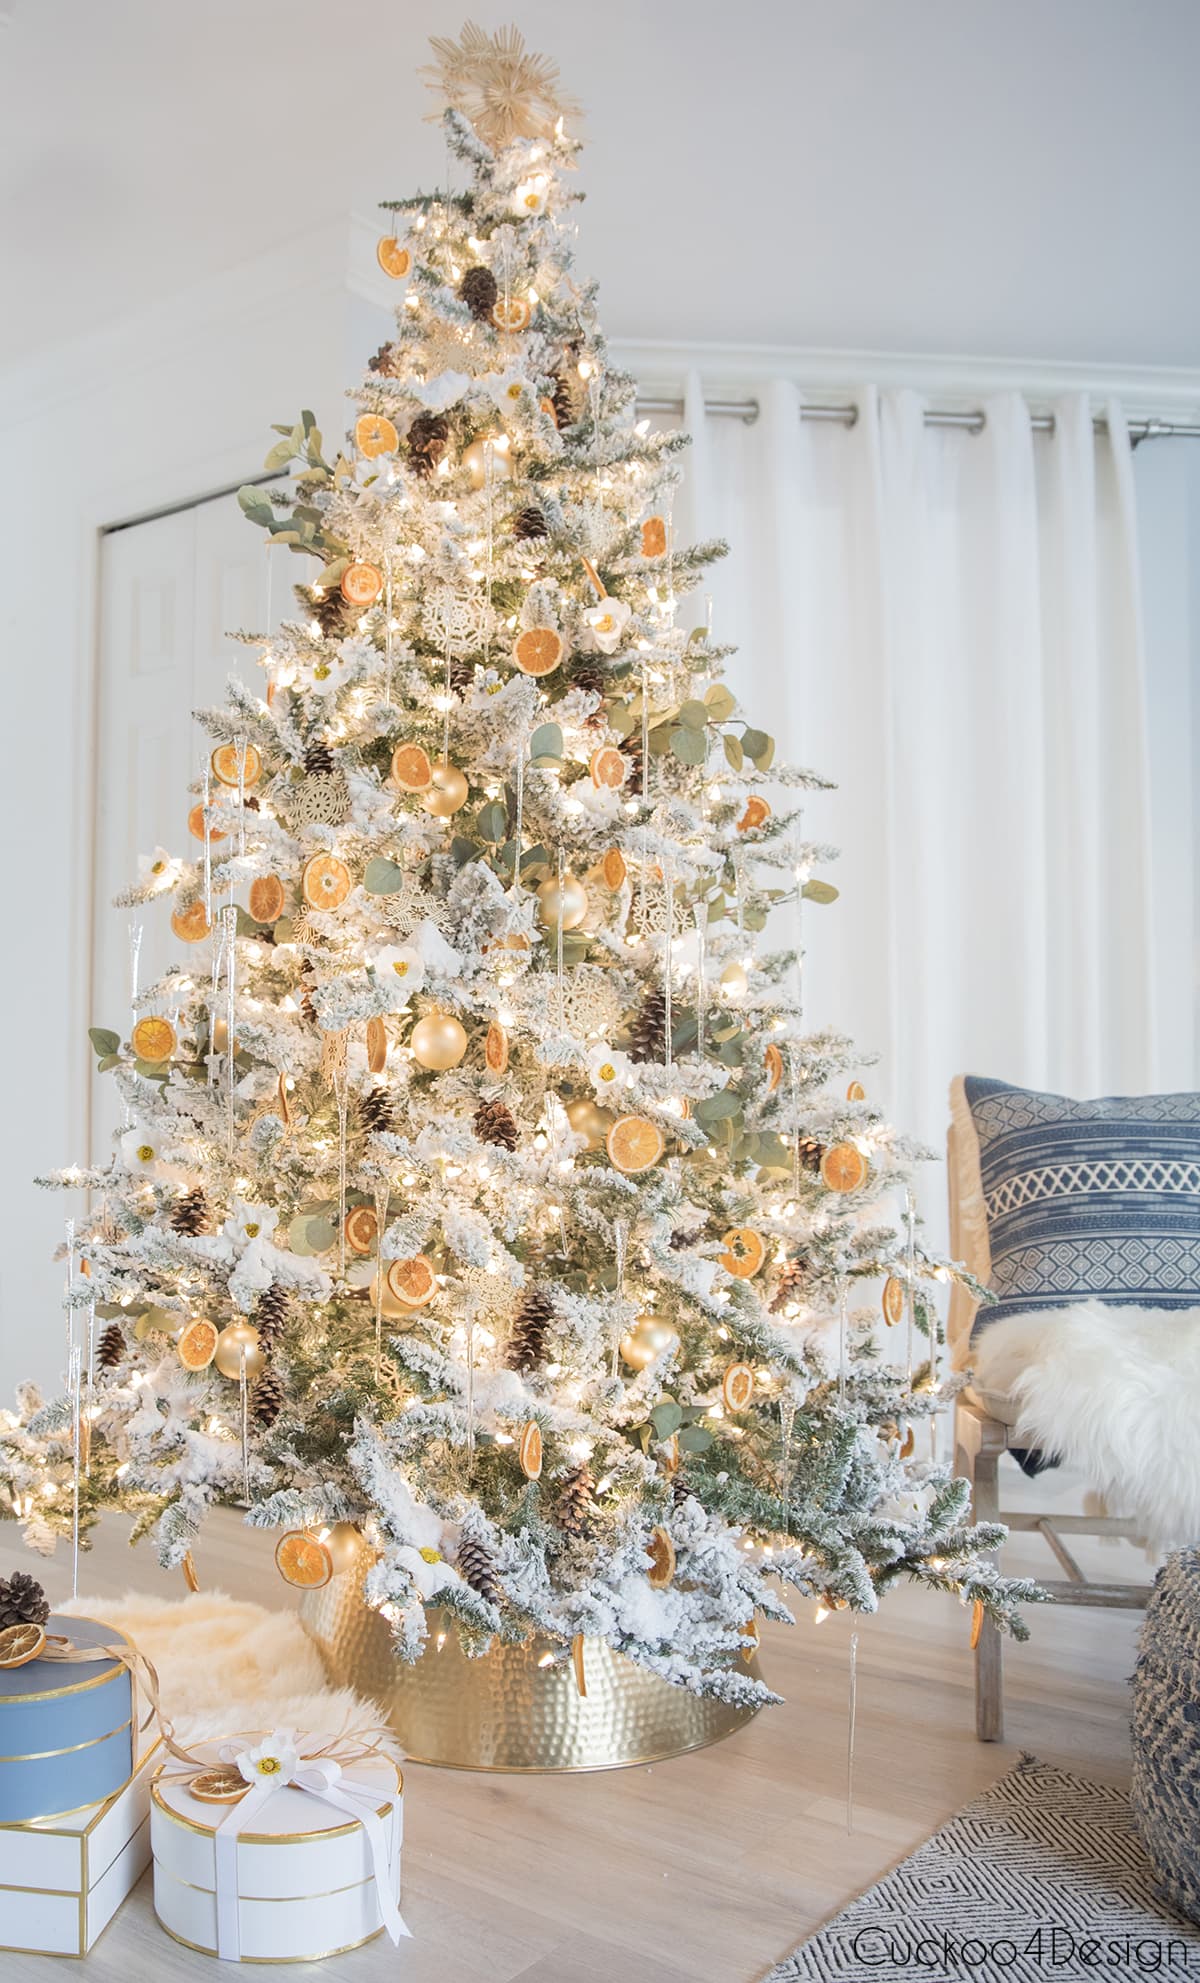 flocked Christmas tree with dried orange slices, eucalyptus branches, straw stars, wooden snowflakes, and pinecones